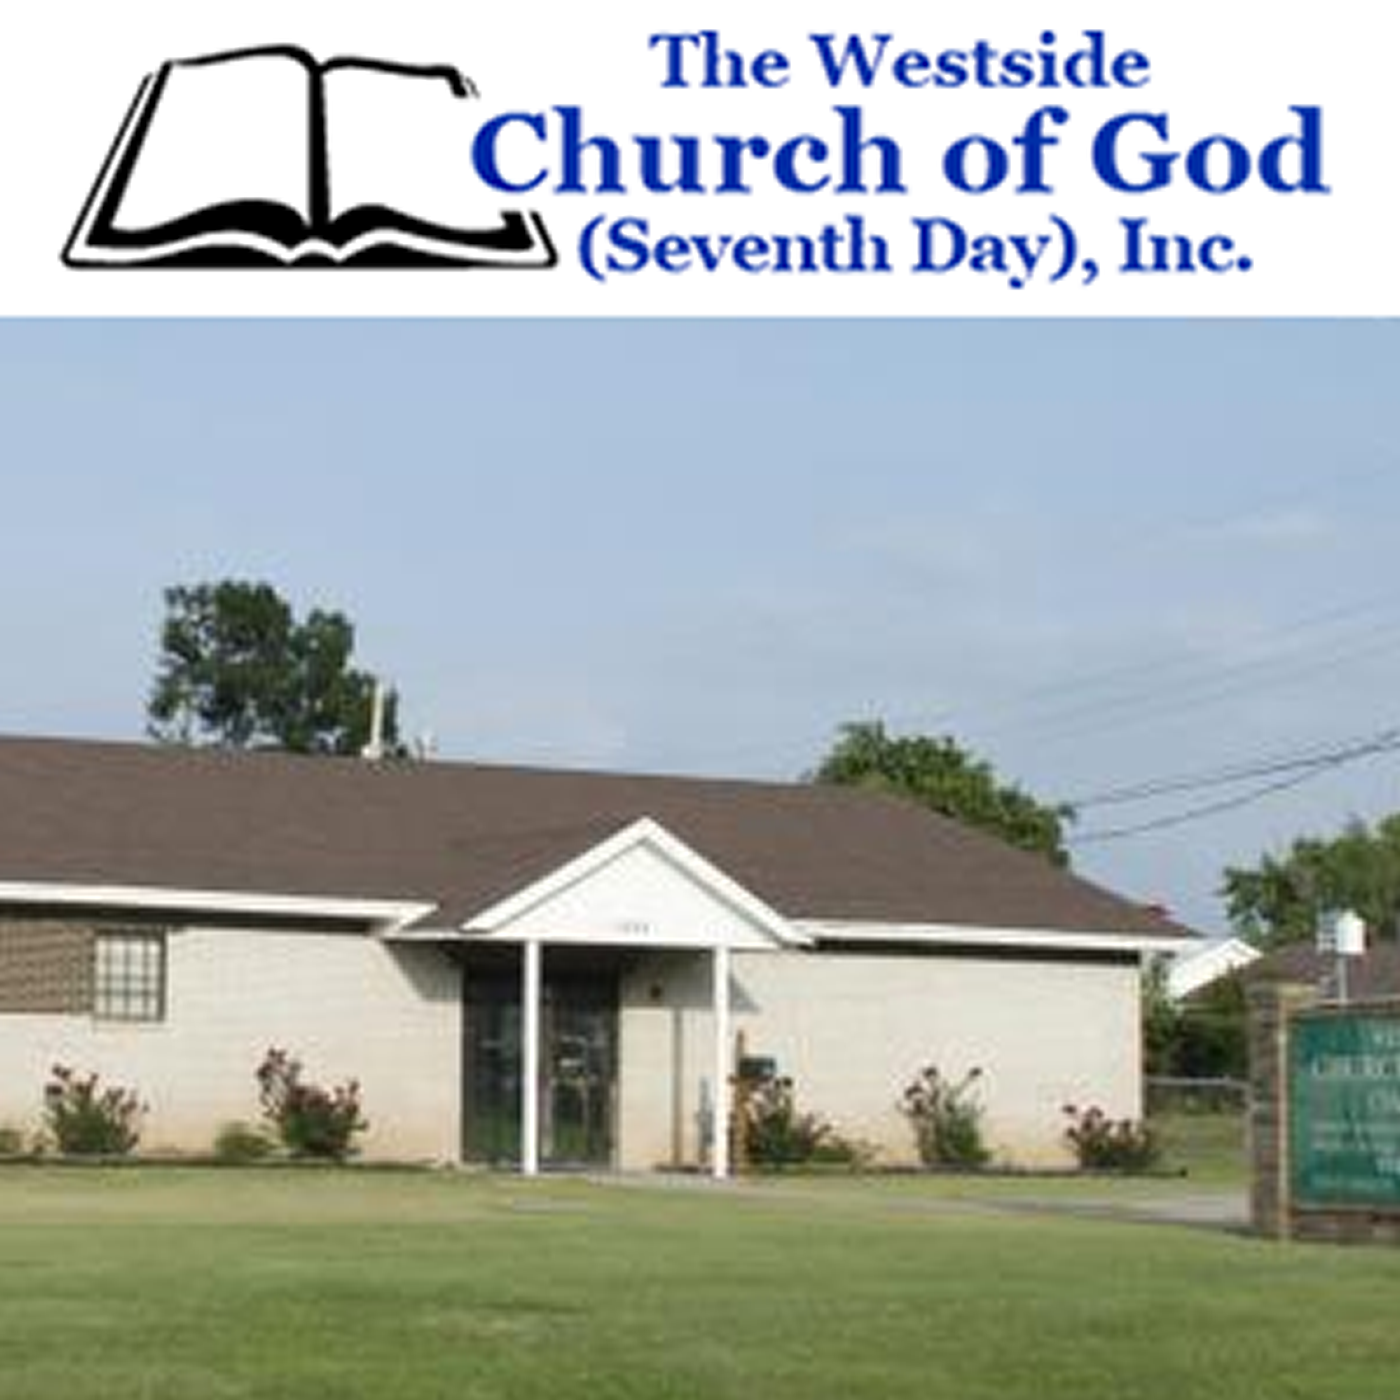 Sermons from Westside Church of God (Seventh Day)